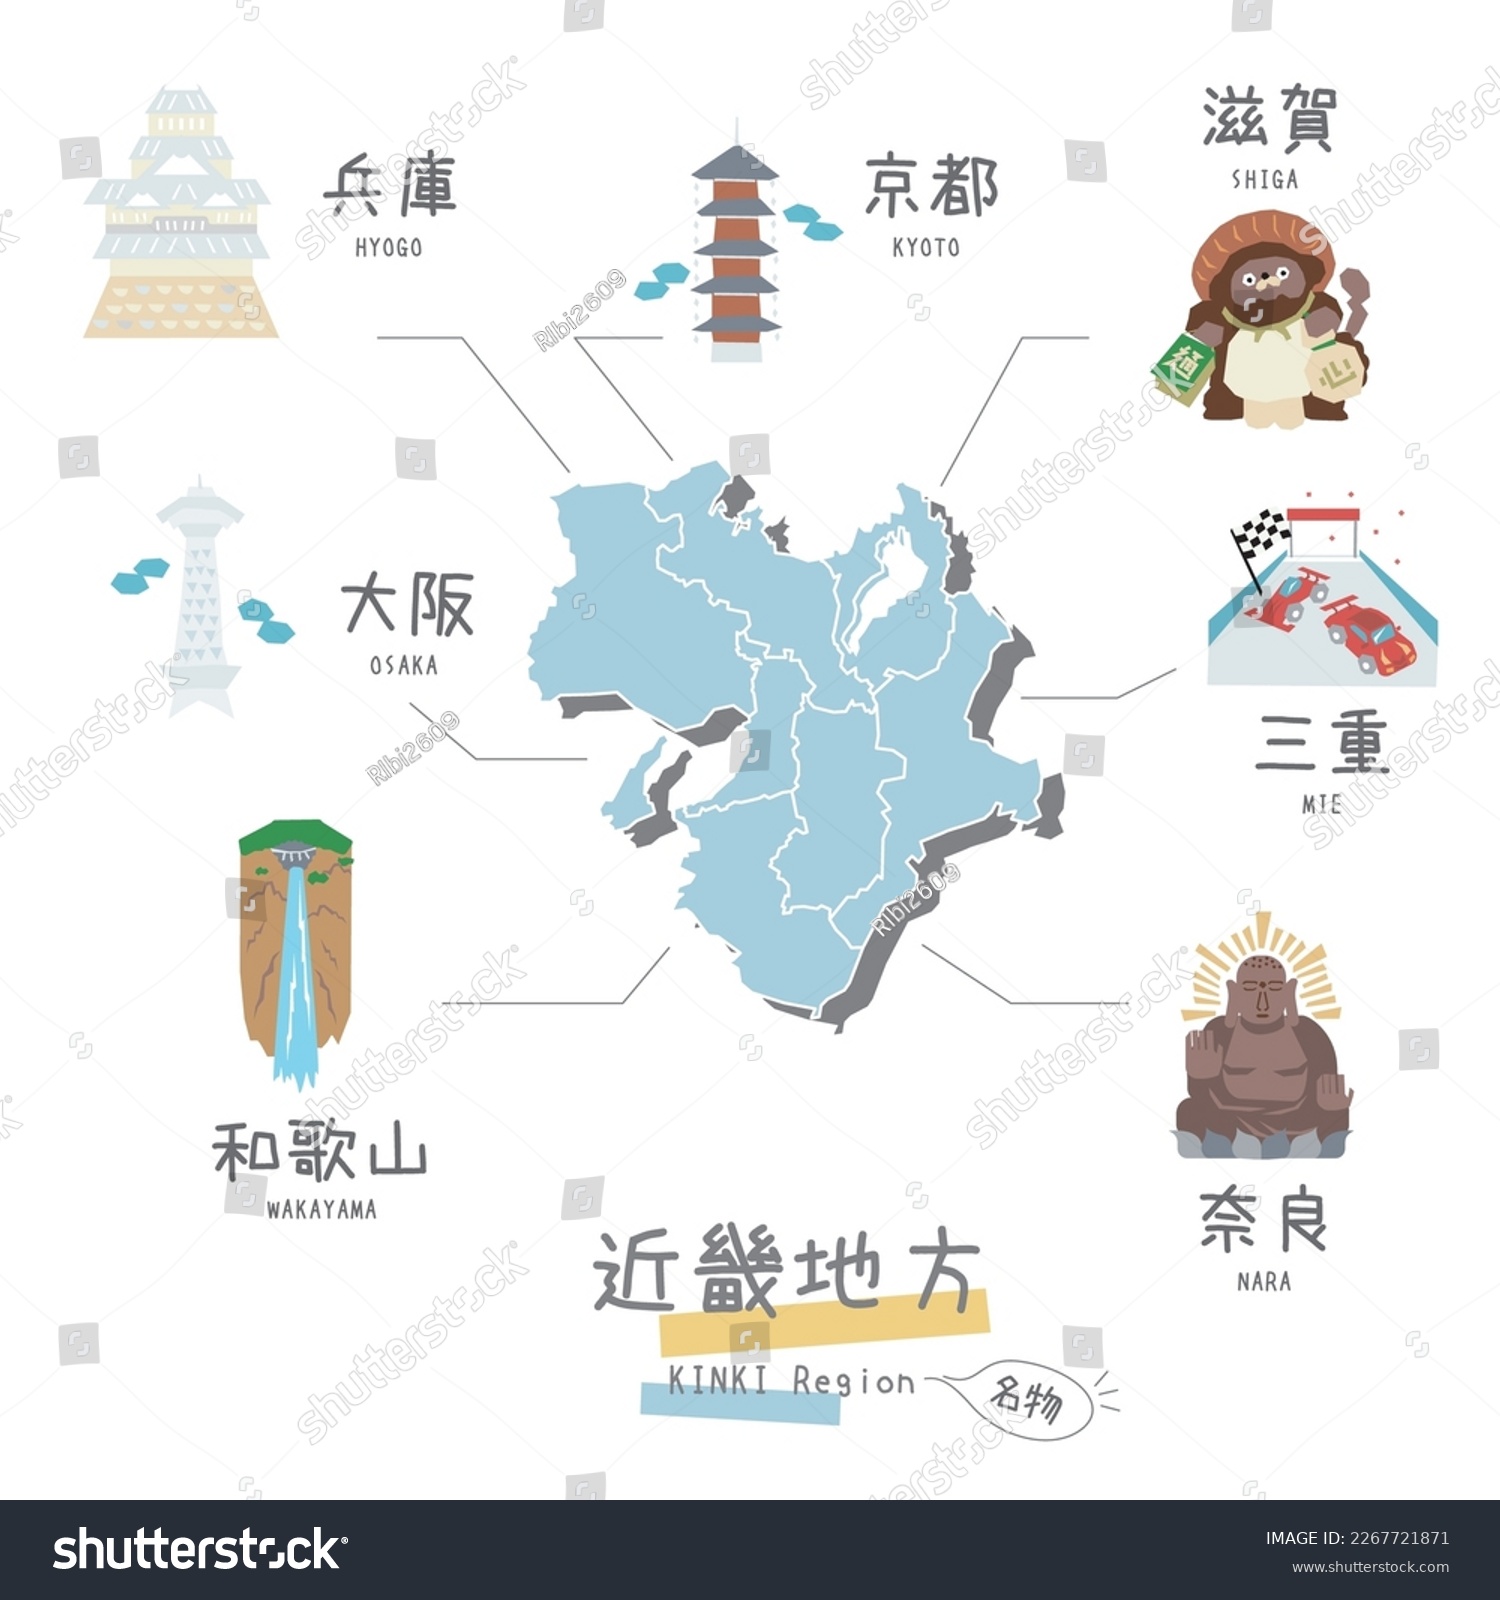 It is an illustration of a set (flat) of specialty tourism, maps, and icons in the Kinki region of Japan. #2267721871